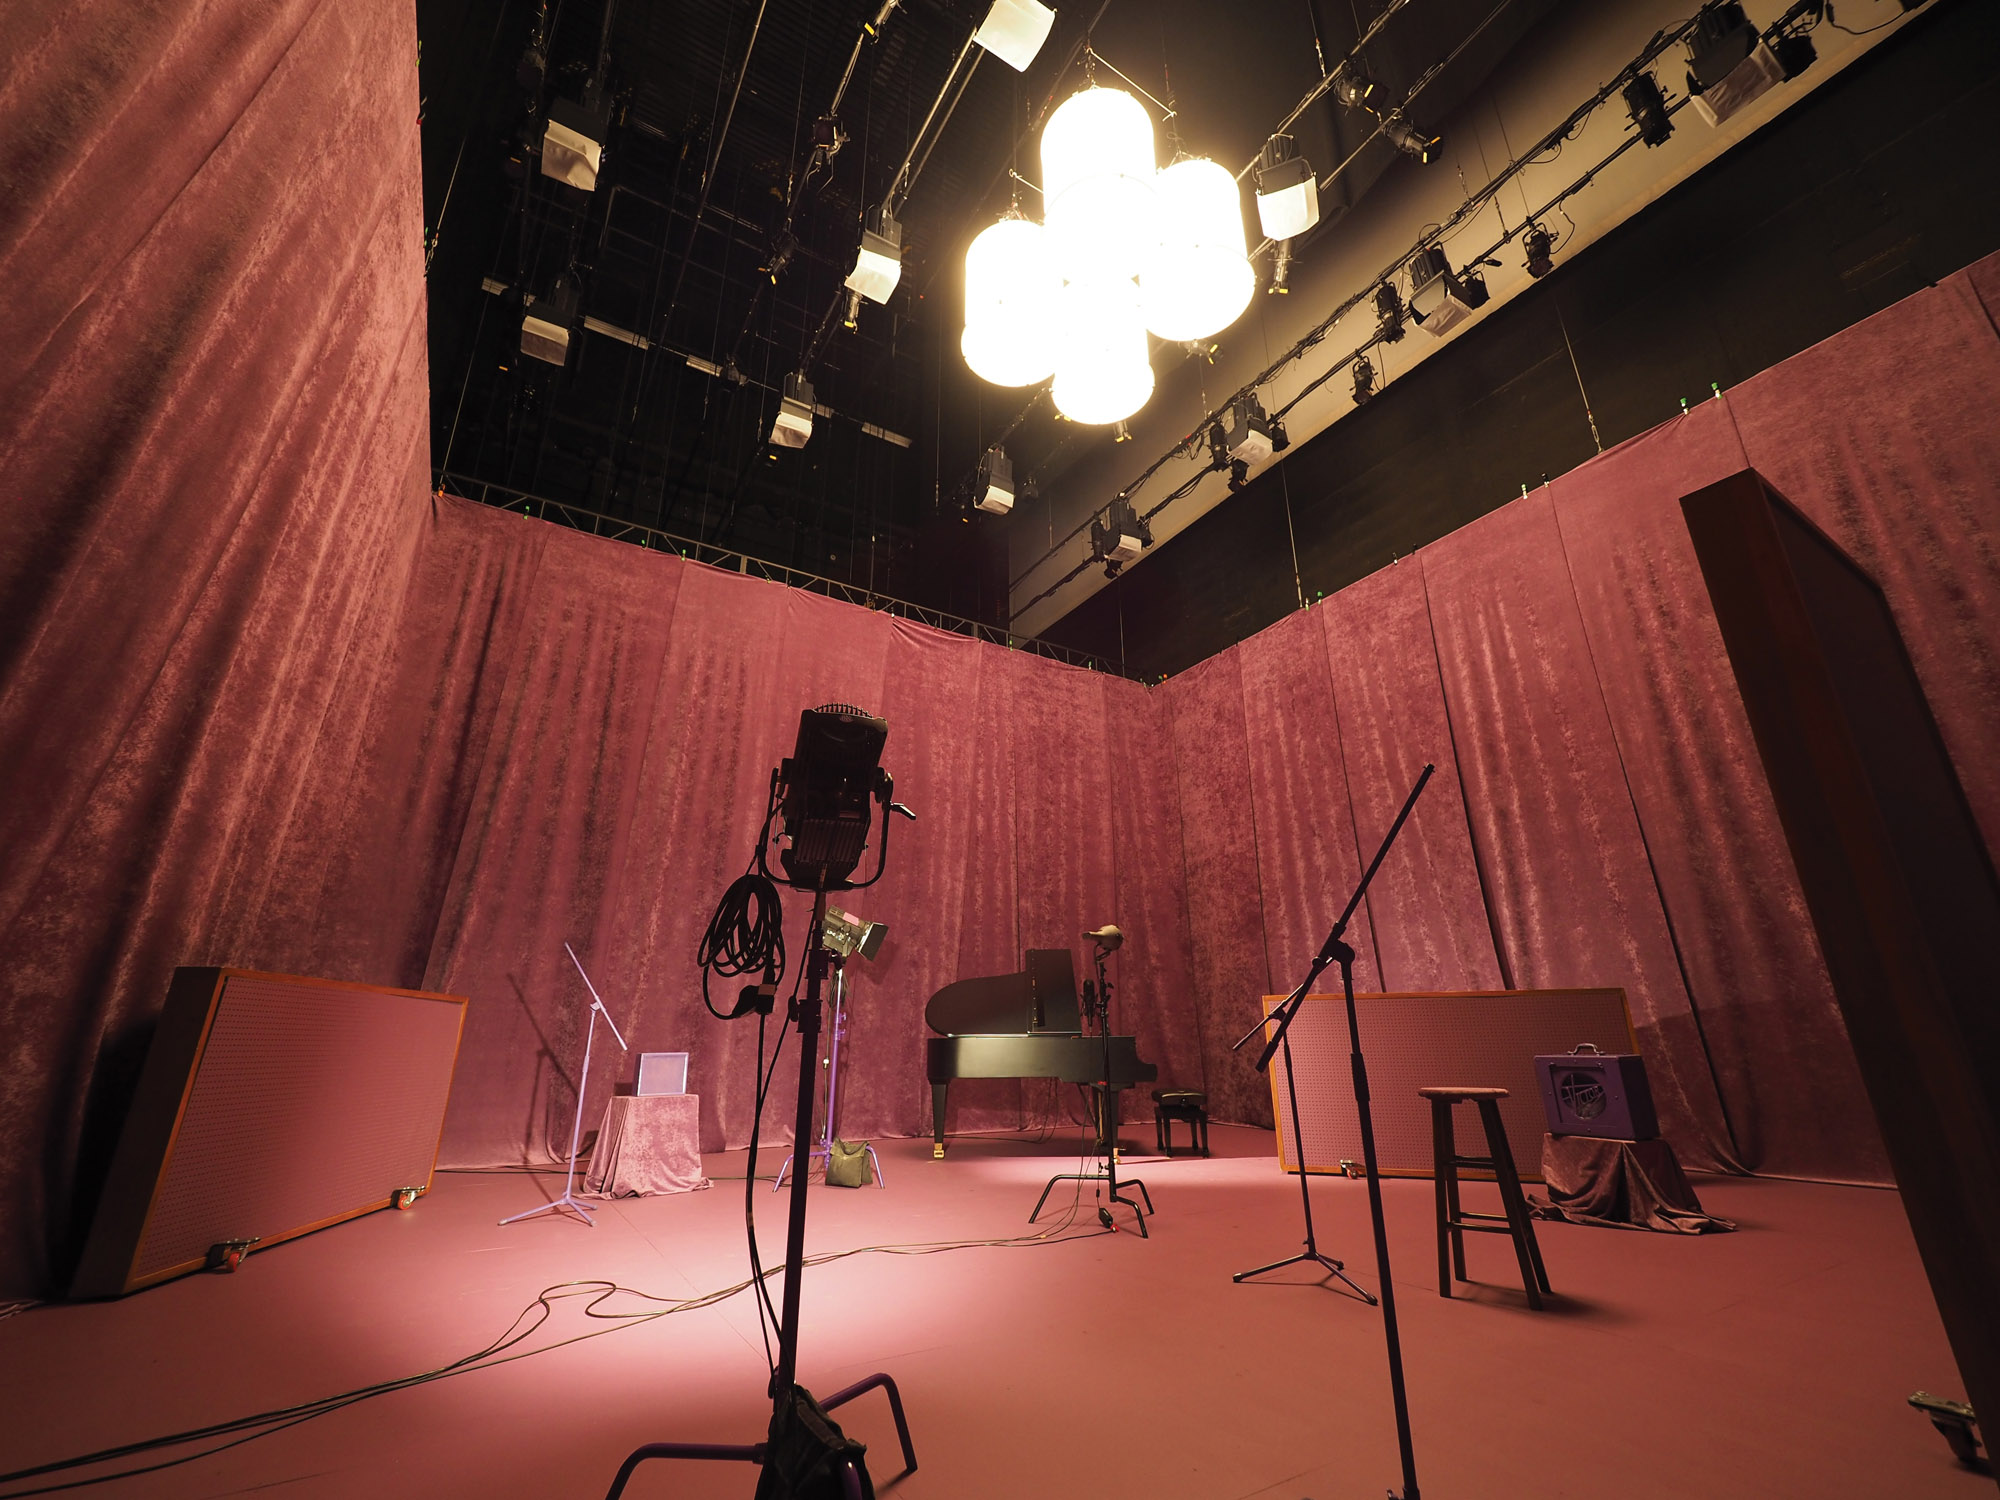 Studio set up with a piano, microphones, amp, and various lighting in a room with pink velvet walls with matching pink floors